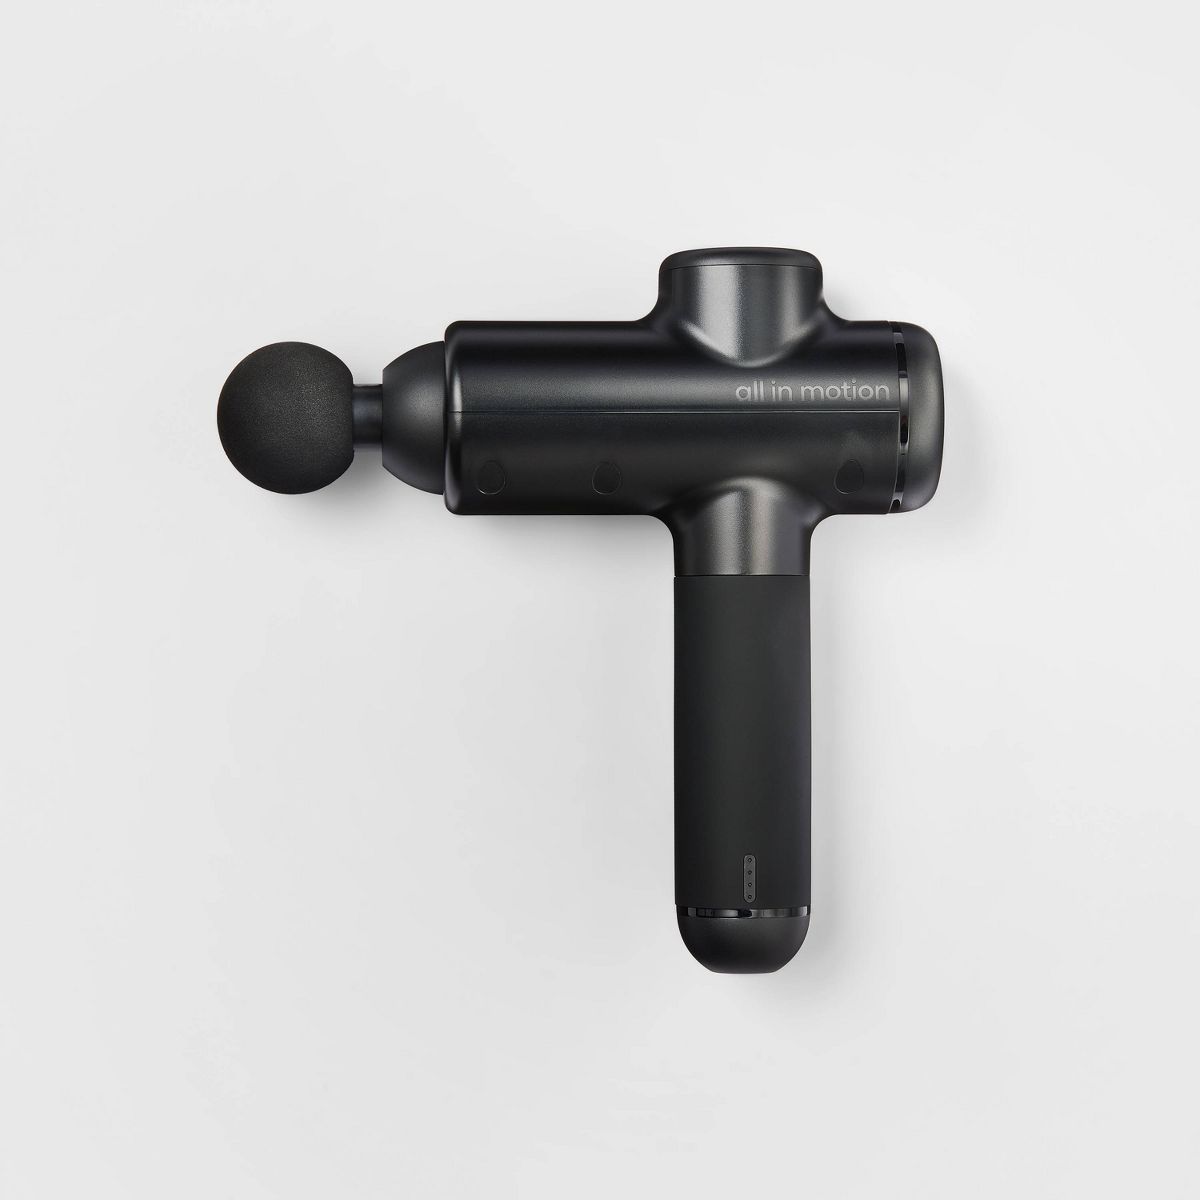 Percussion Massage Gun - All in Motion™ | Target